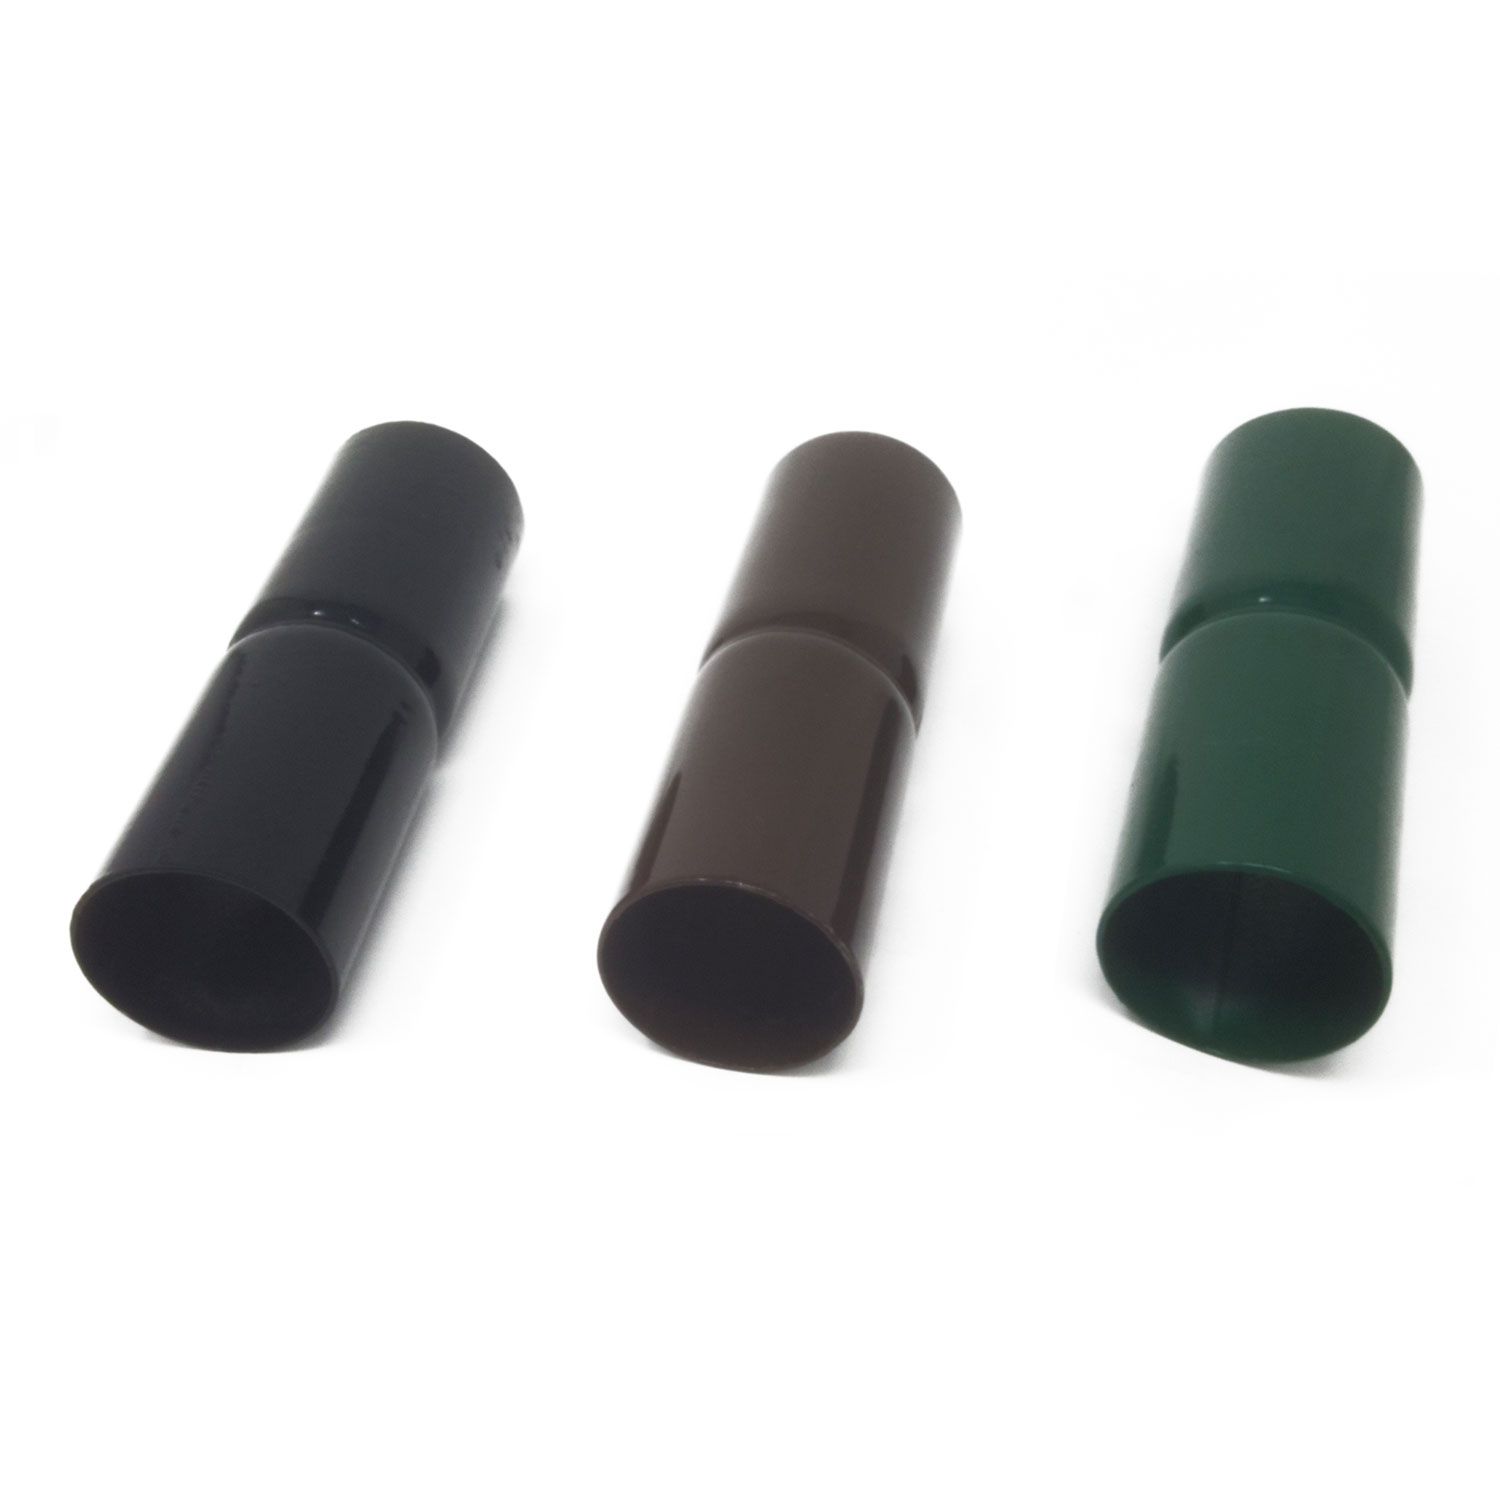 Chain Link Fence Top Rail Sleeves - Black, Brown, and Green